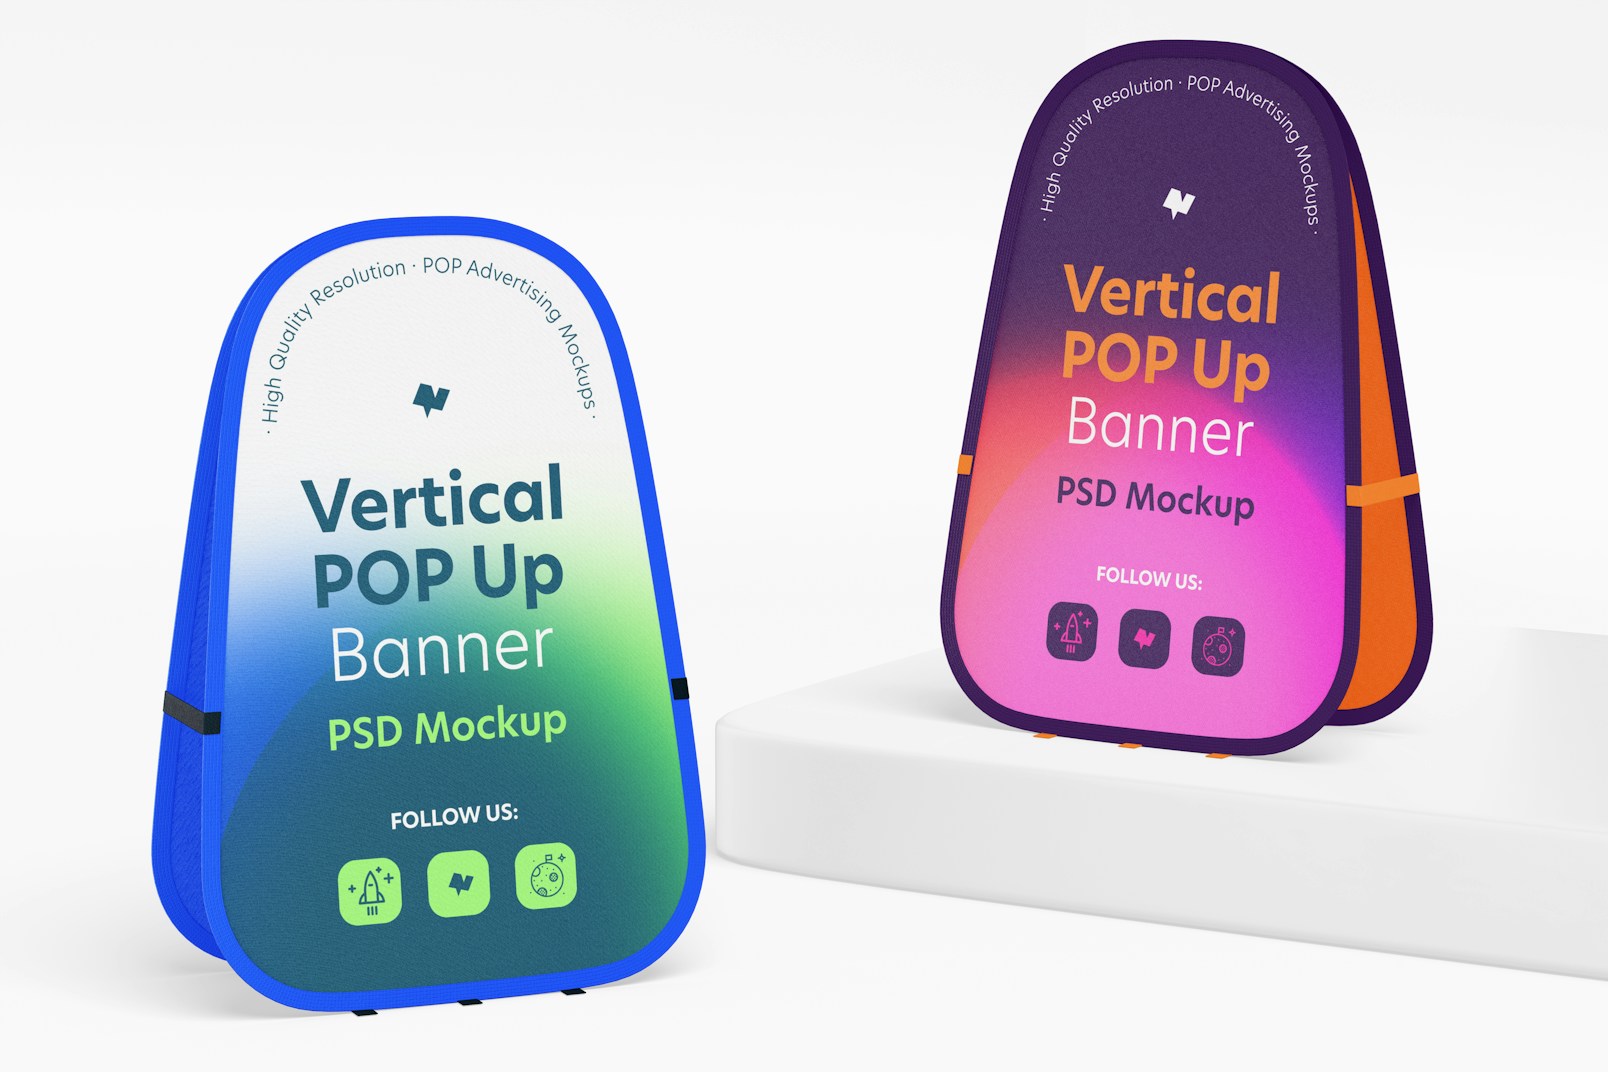 Vertical Pop Up Banners Mockup, Perspective